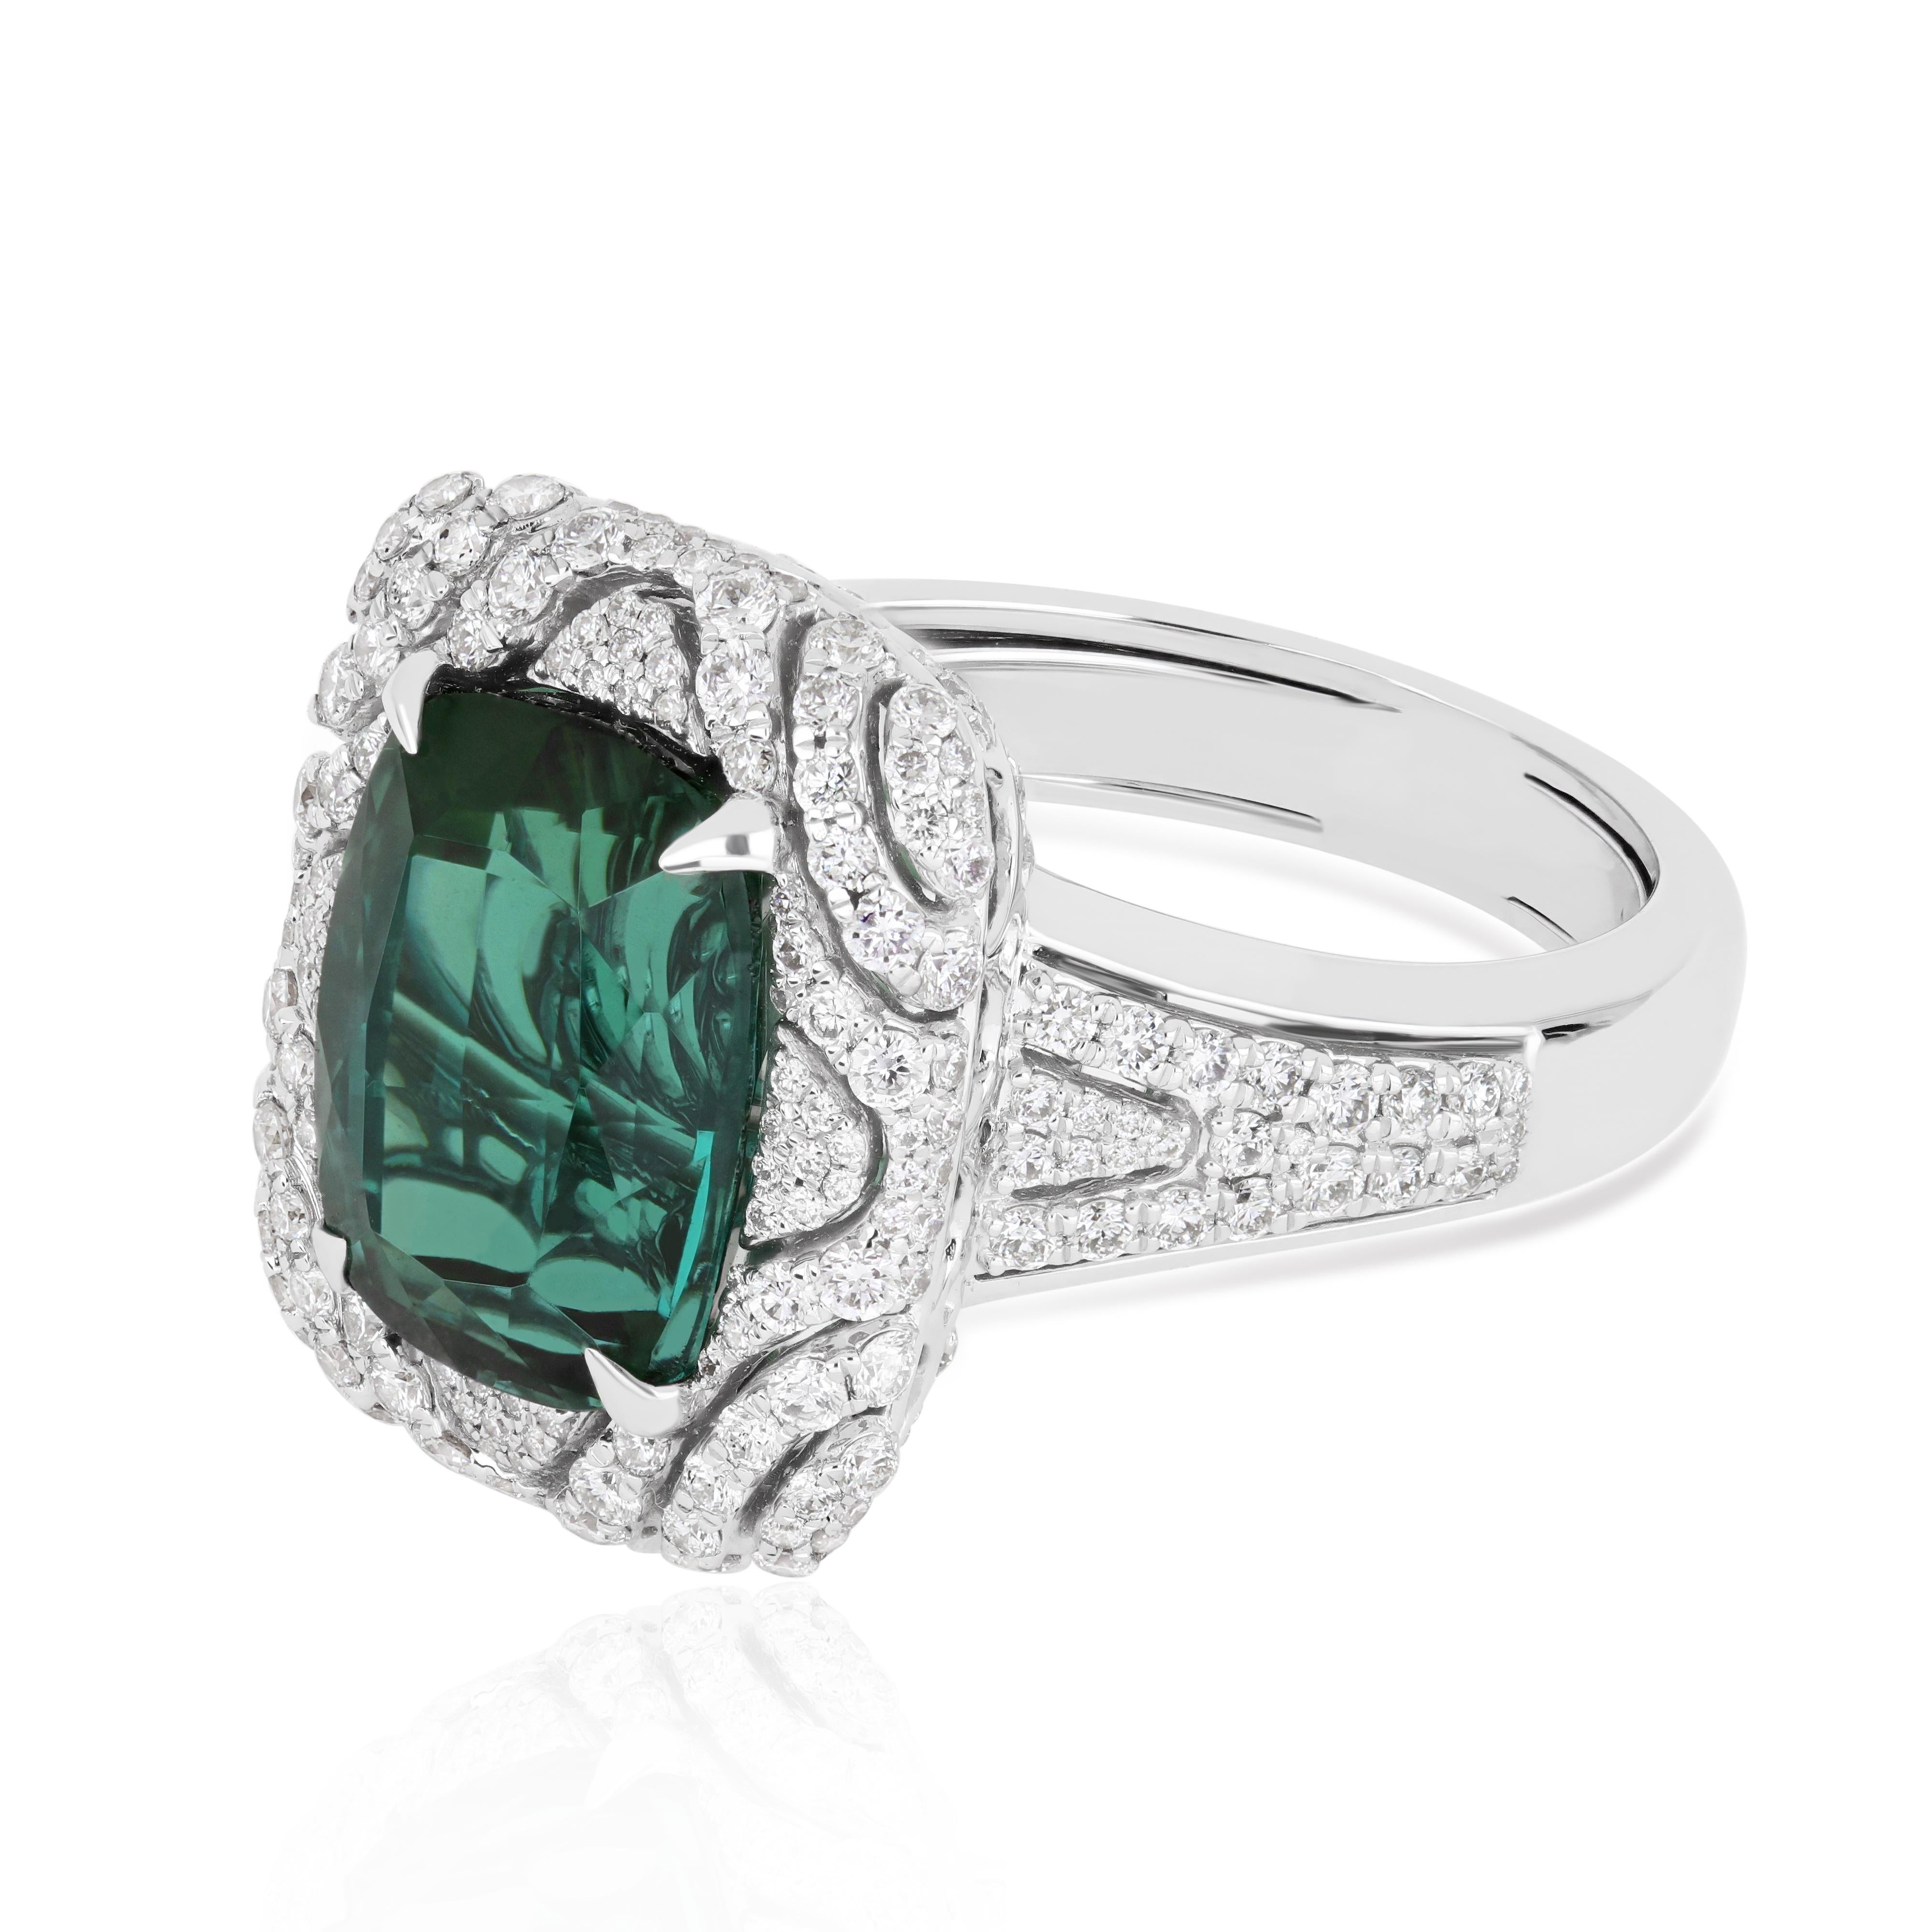 Antique Cushion Cut 8.7 Carat Green Tourmaline and Diamond Studded Ring in 18K White Gold For Sale